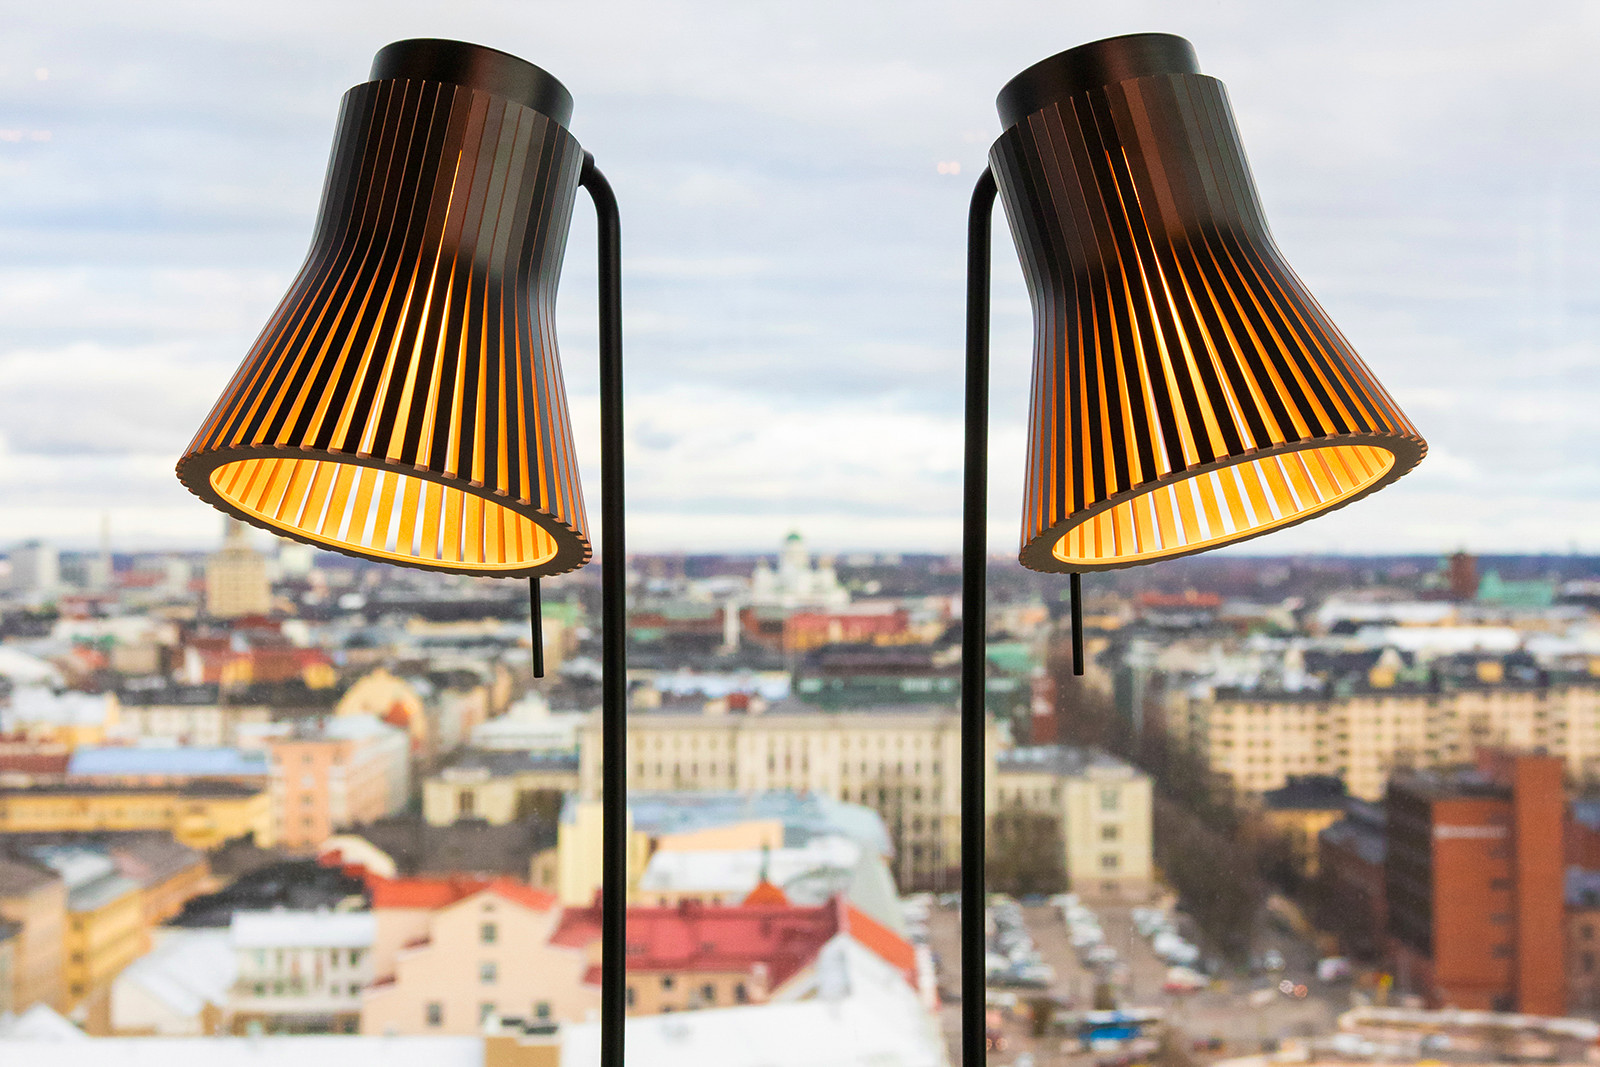 Two Petite table lamps in front of a window. A view of Helsinki in the background.